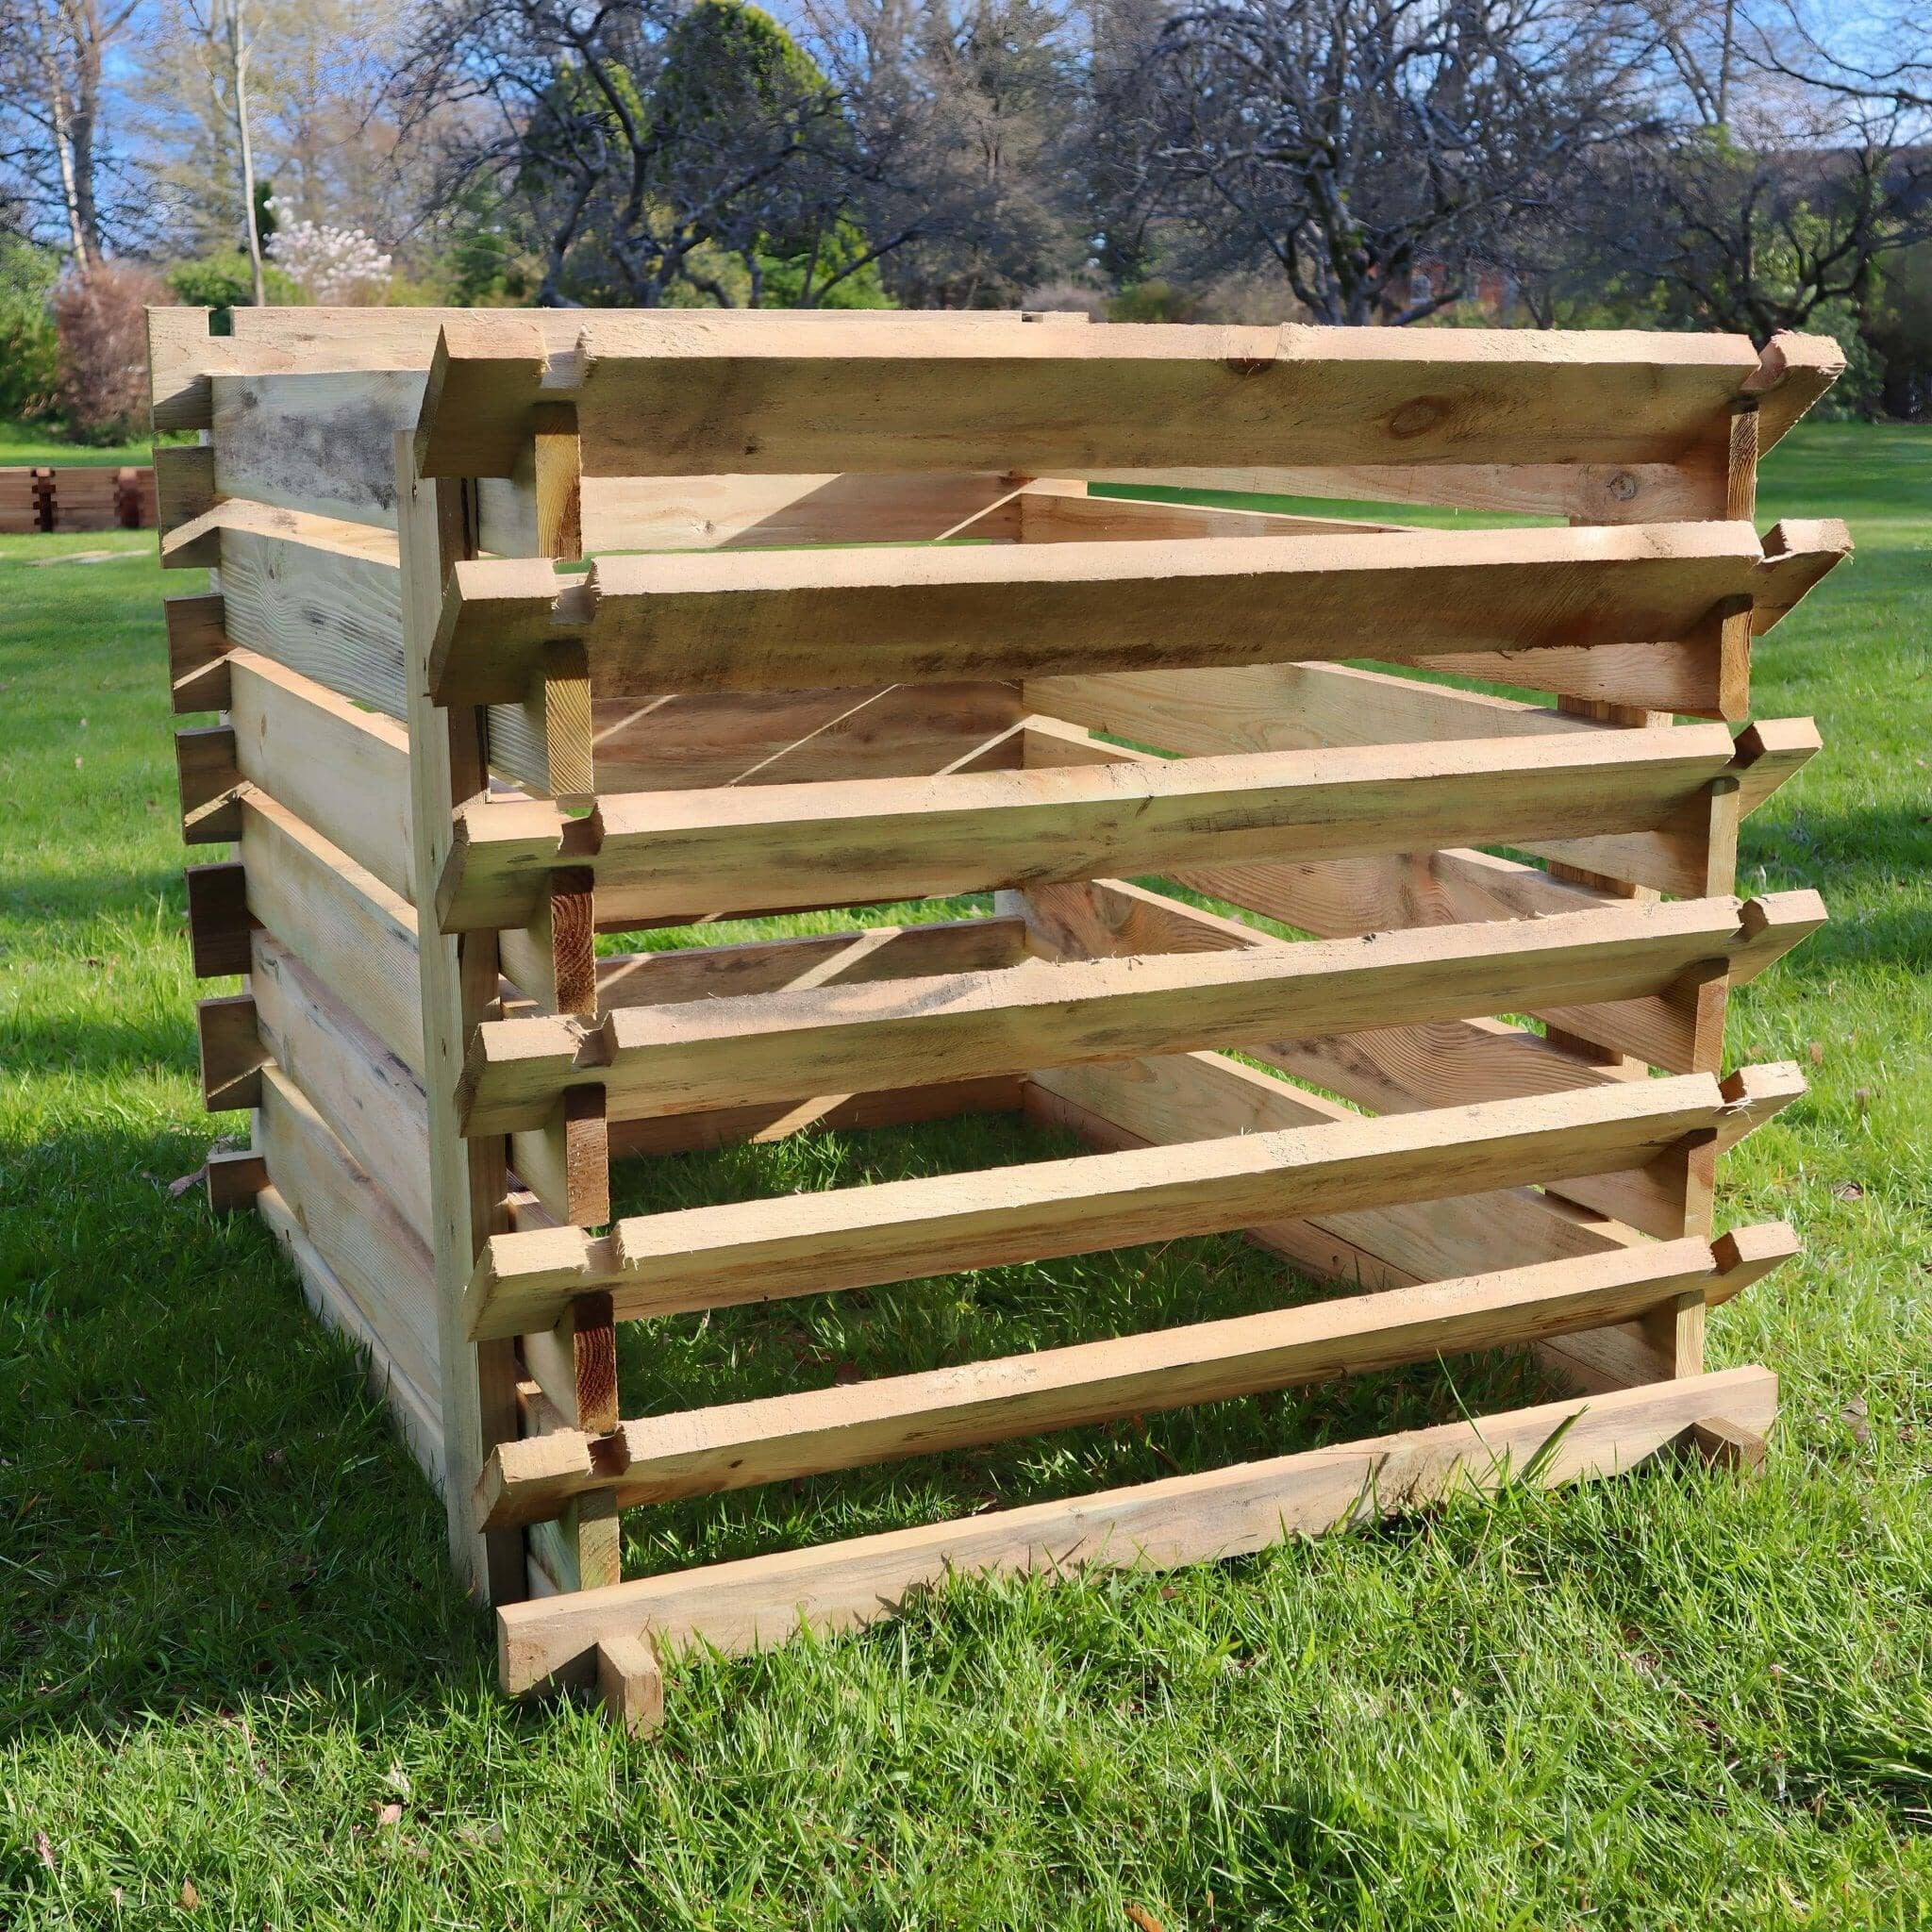 Easy Fill Wooden Compost Bin Composter 718 Litres by Woven Wood™ - Woven Wood